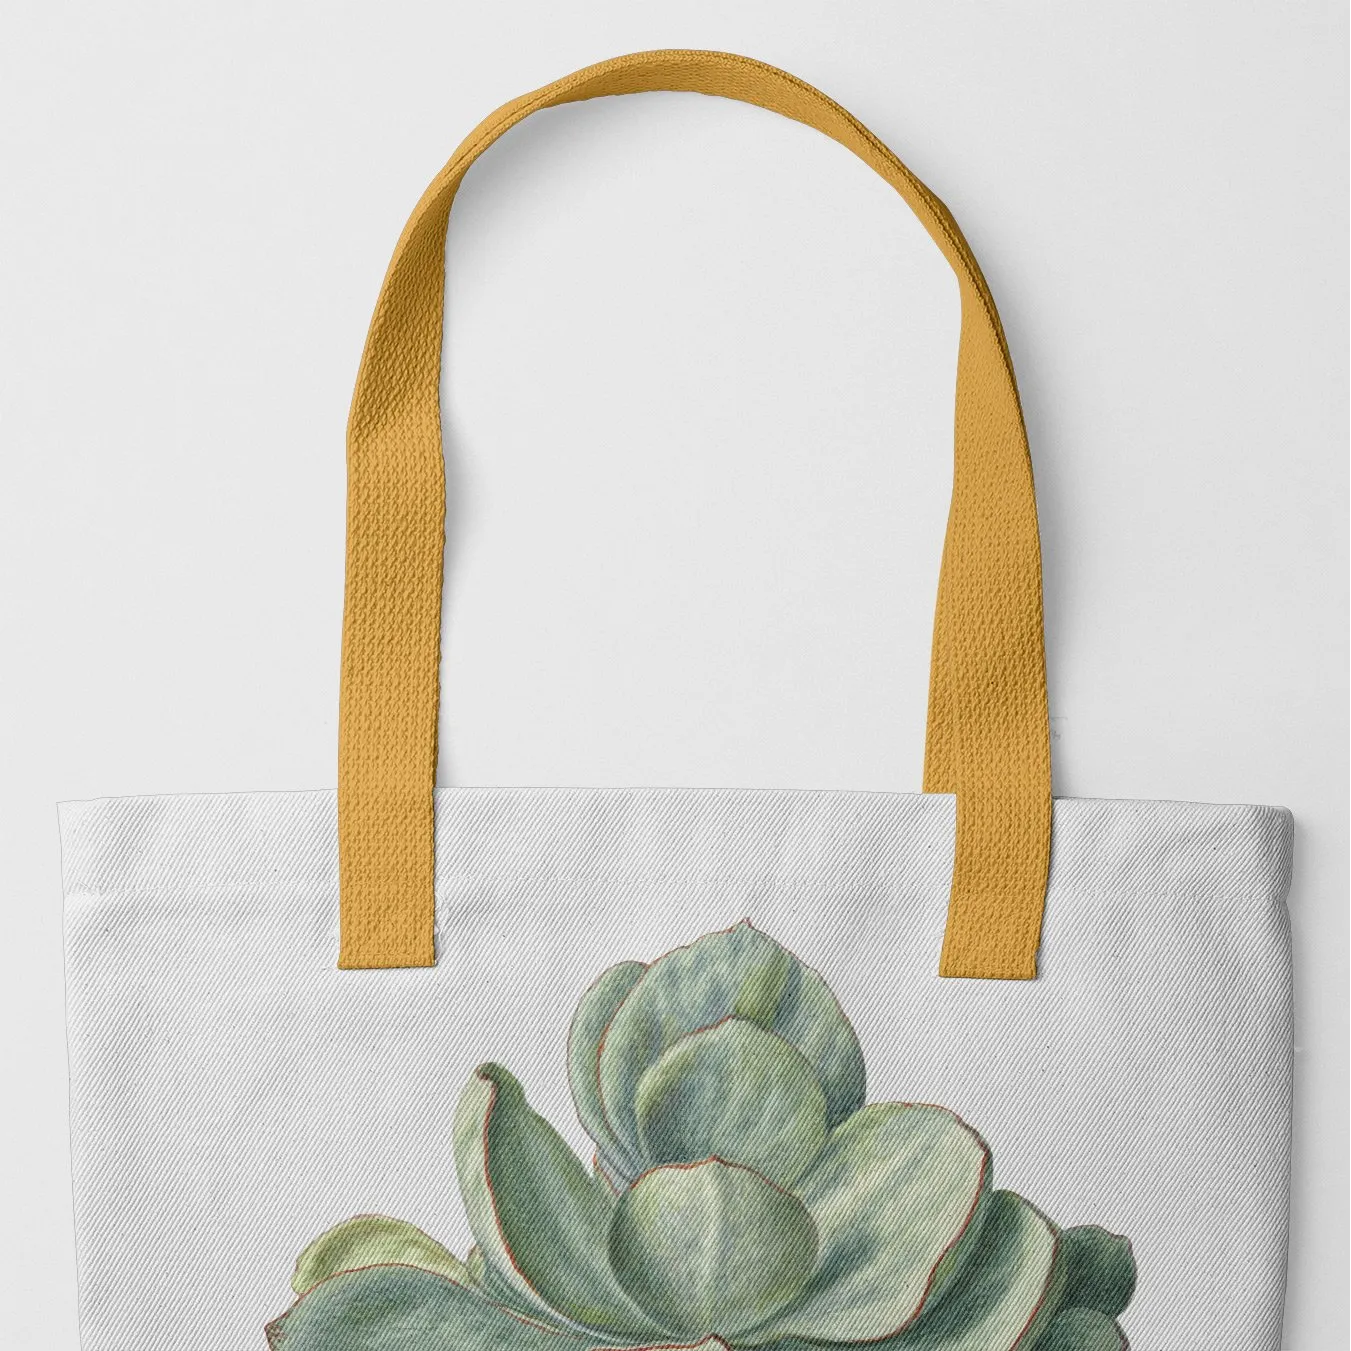 Little Green Man Tote - Silver Bullet - Heavy Duty Reusable Grocery Bag - Yellow Handles - Shopping Totes - Aesthetic